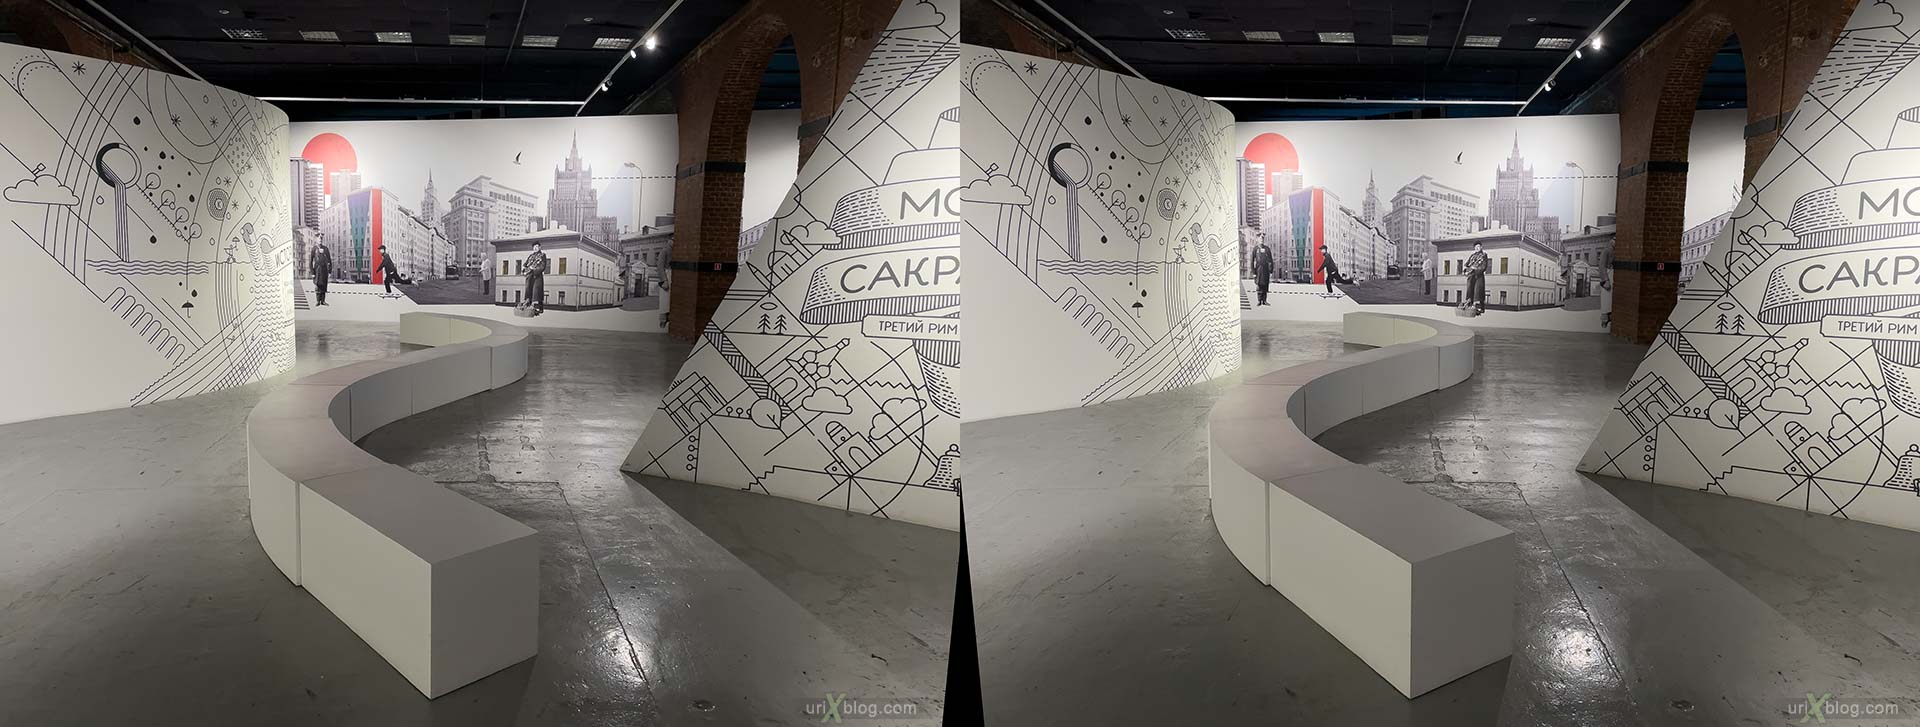 museum, exhibition, designing the future, Moscow, Russia, 3D, stereo pair, cross-eyed, crossview, cross view stereo pair, stereoscopic